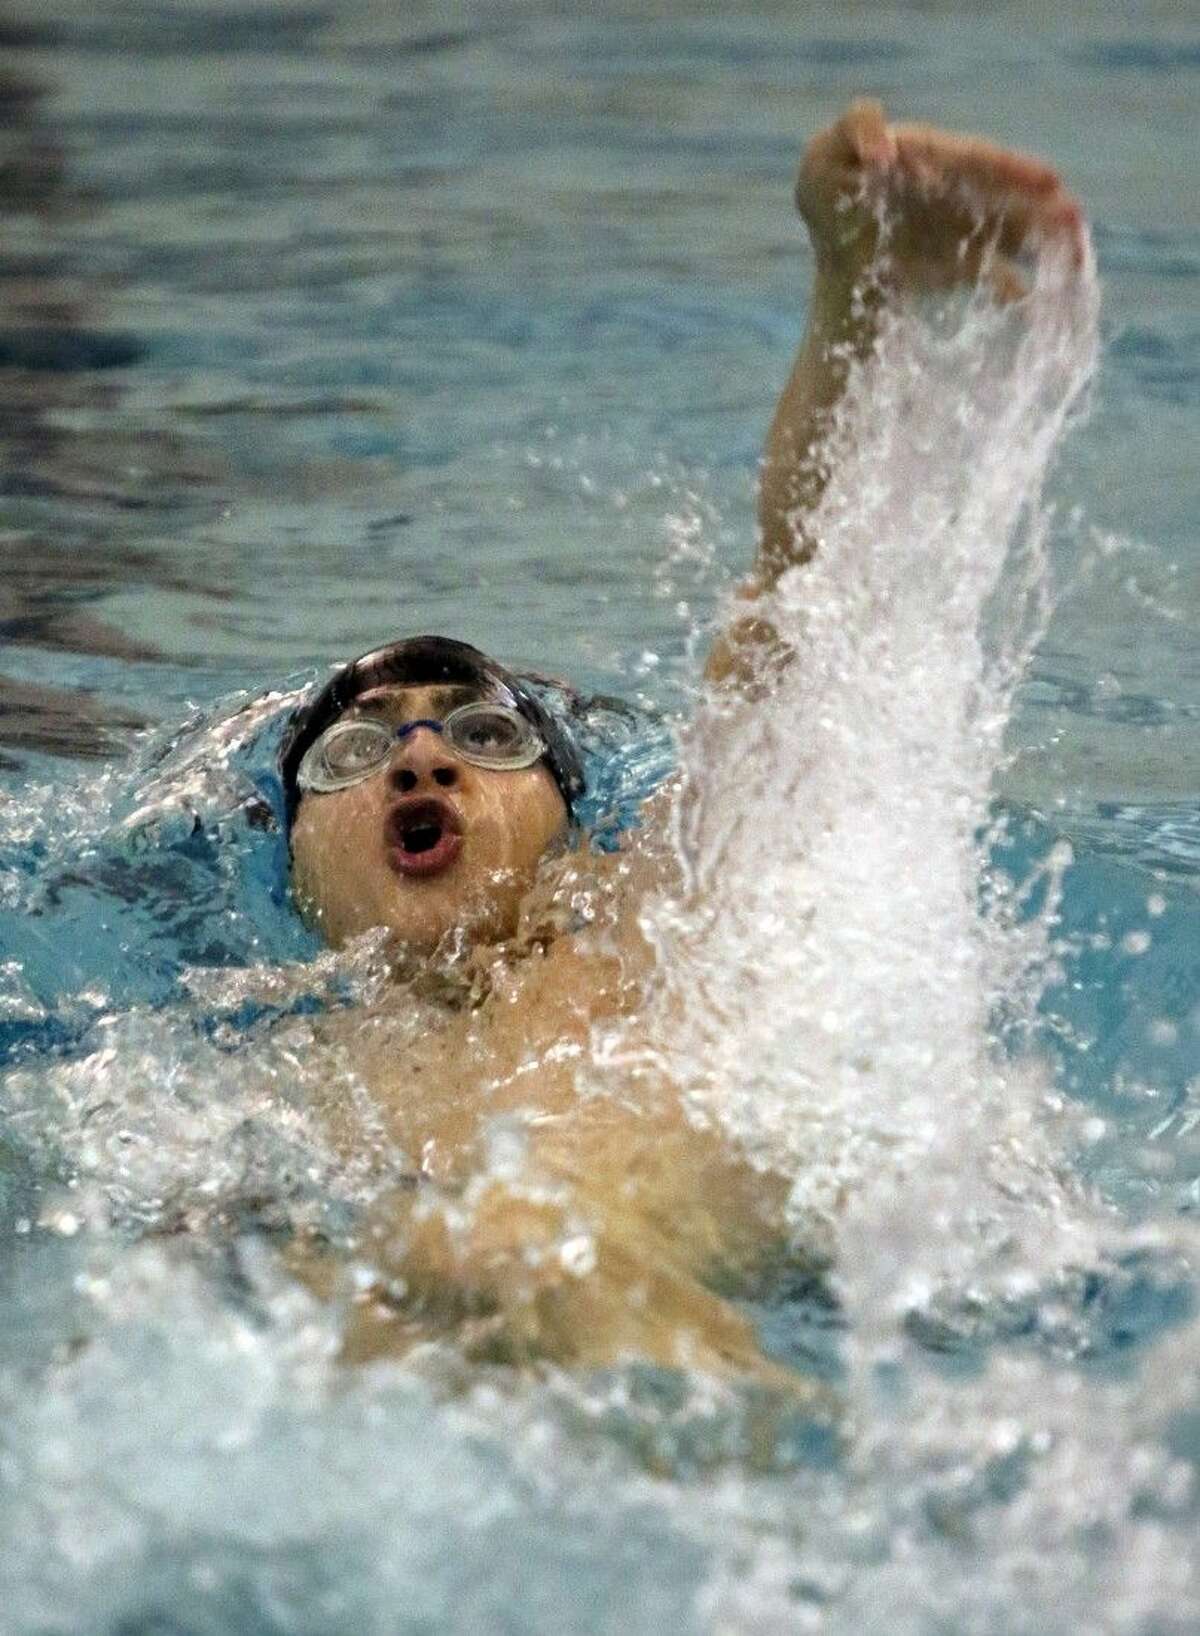 Cinco Ranch's Alex Smilenov swims in the Boys 100 Yard Backstroke at the Duel In The Pool swim meet Jan. 10 at Katy High School in Katy. To view or purchase this photo and others like it, go to HCNPics.com.